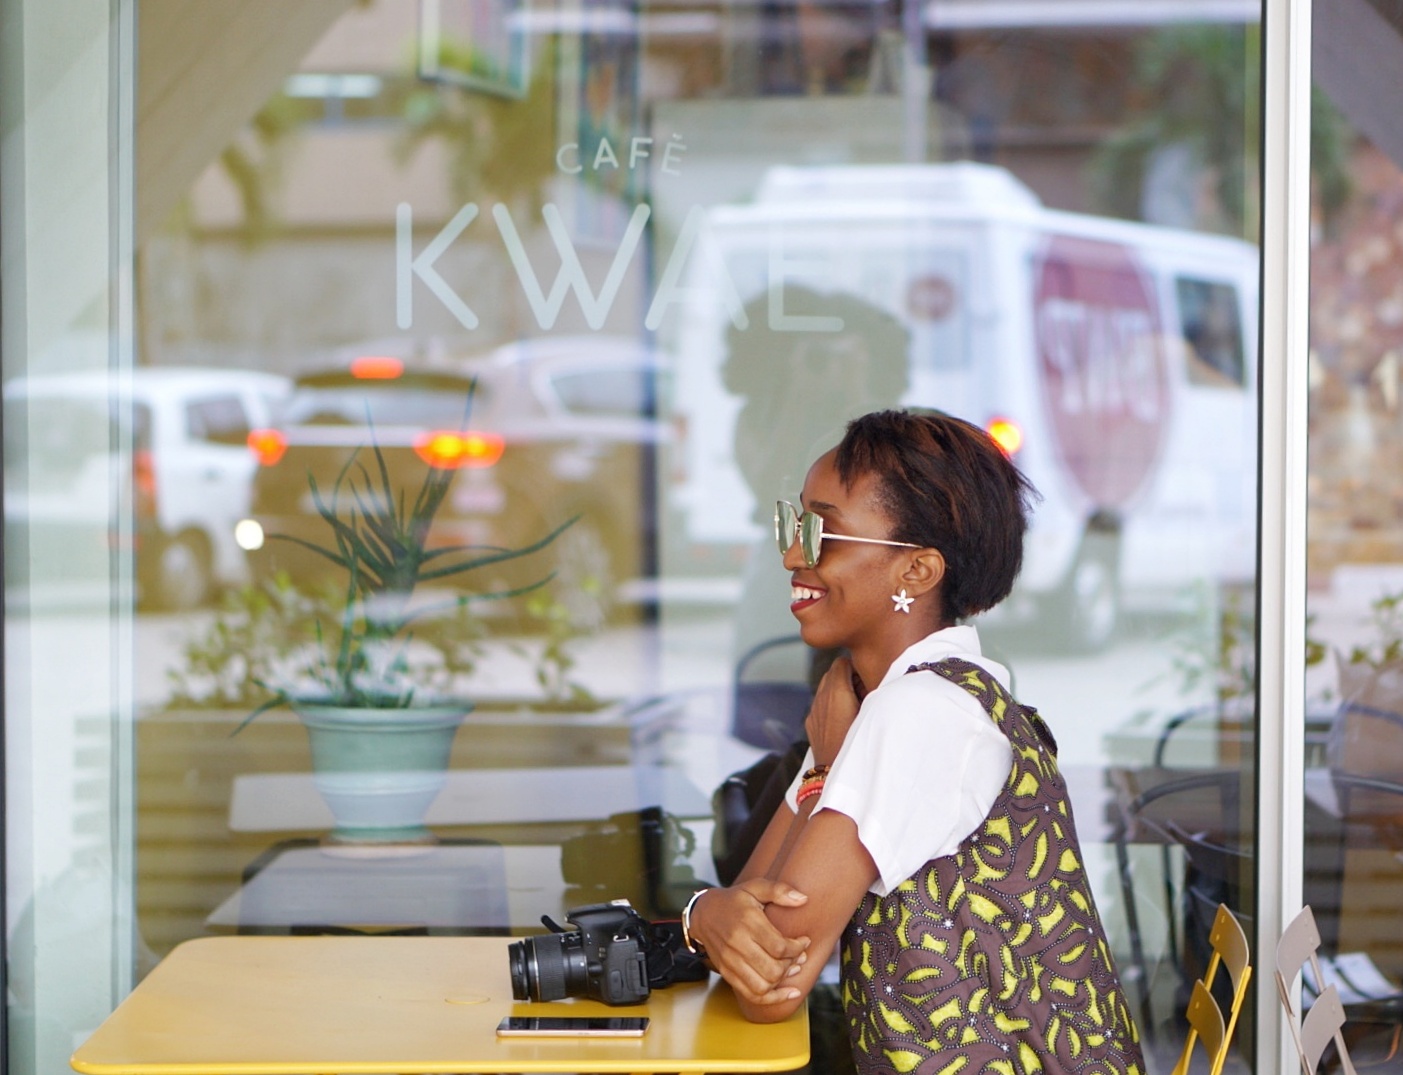 Life lessons - Nigerian blogger Cassie daves sitting at cafe kwae in Accra